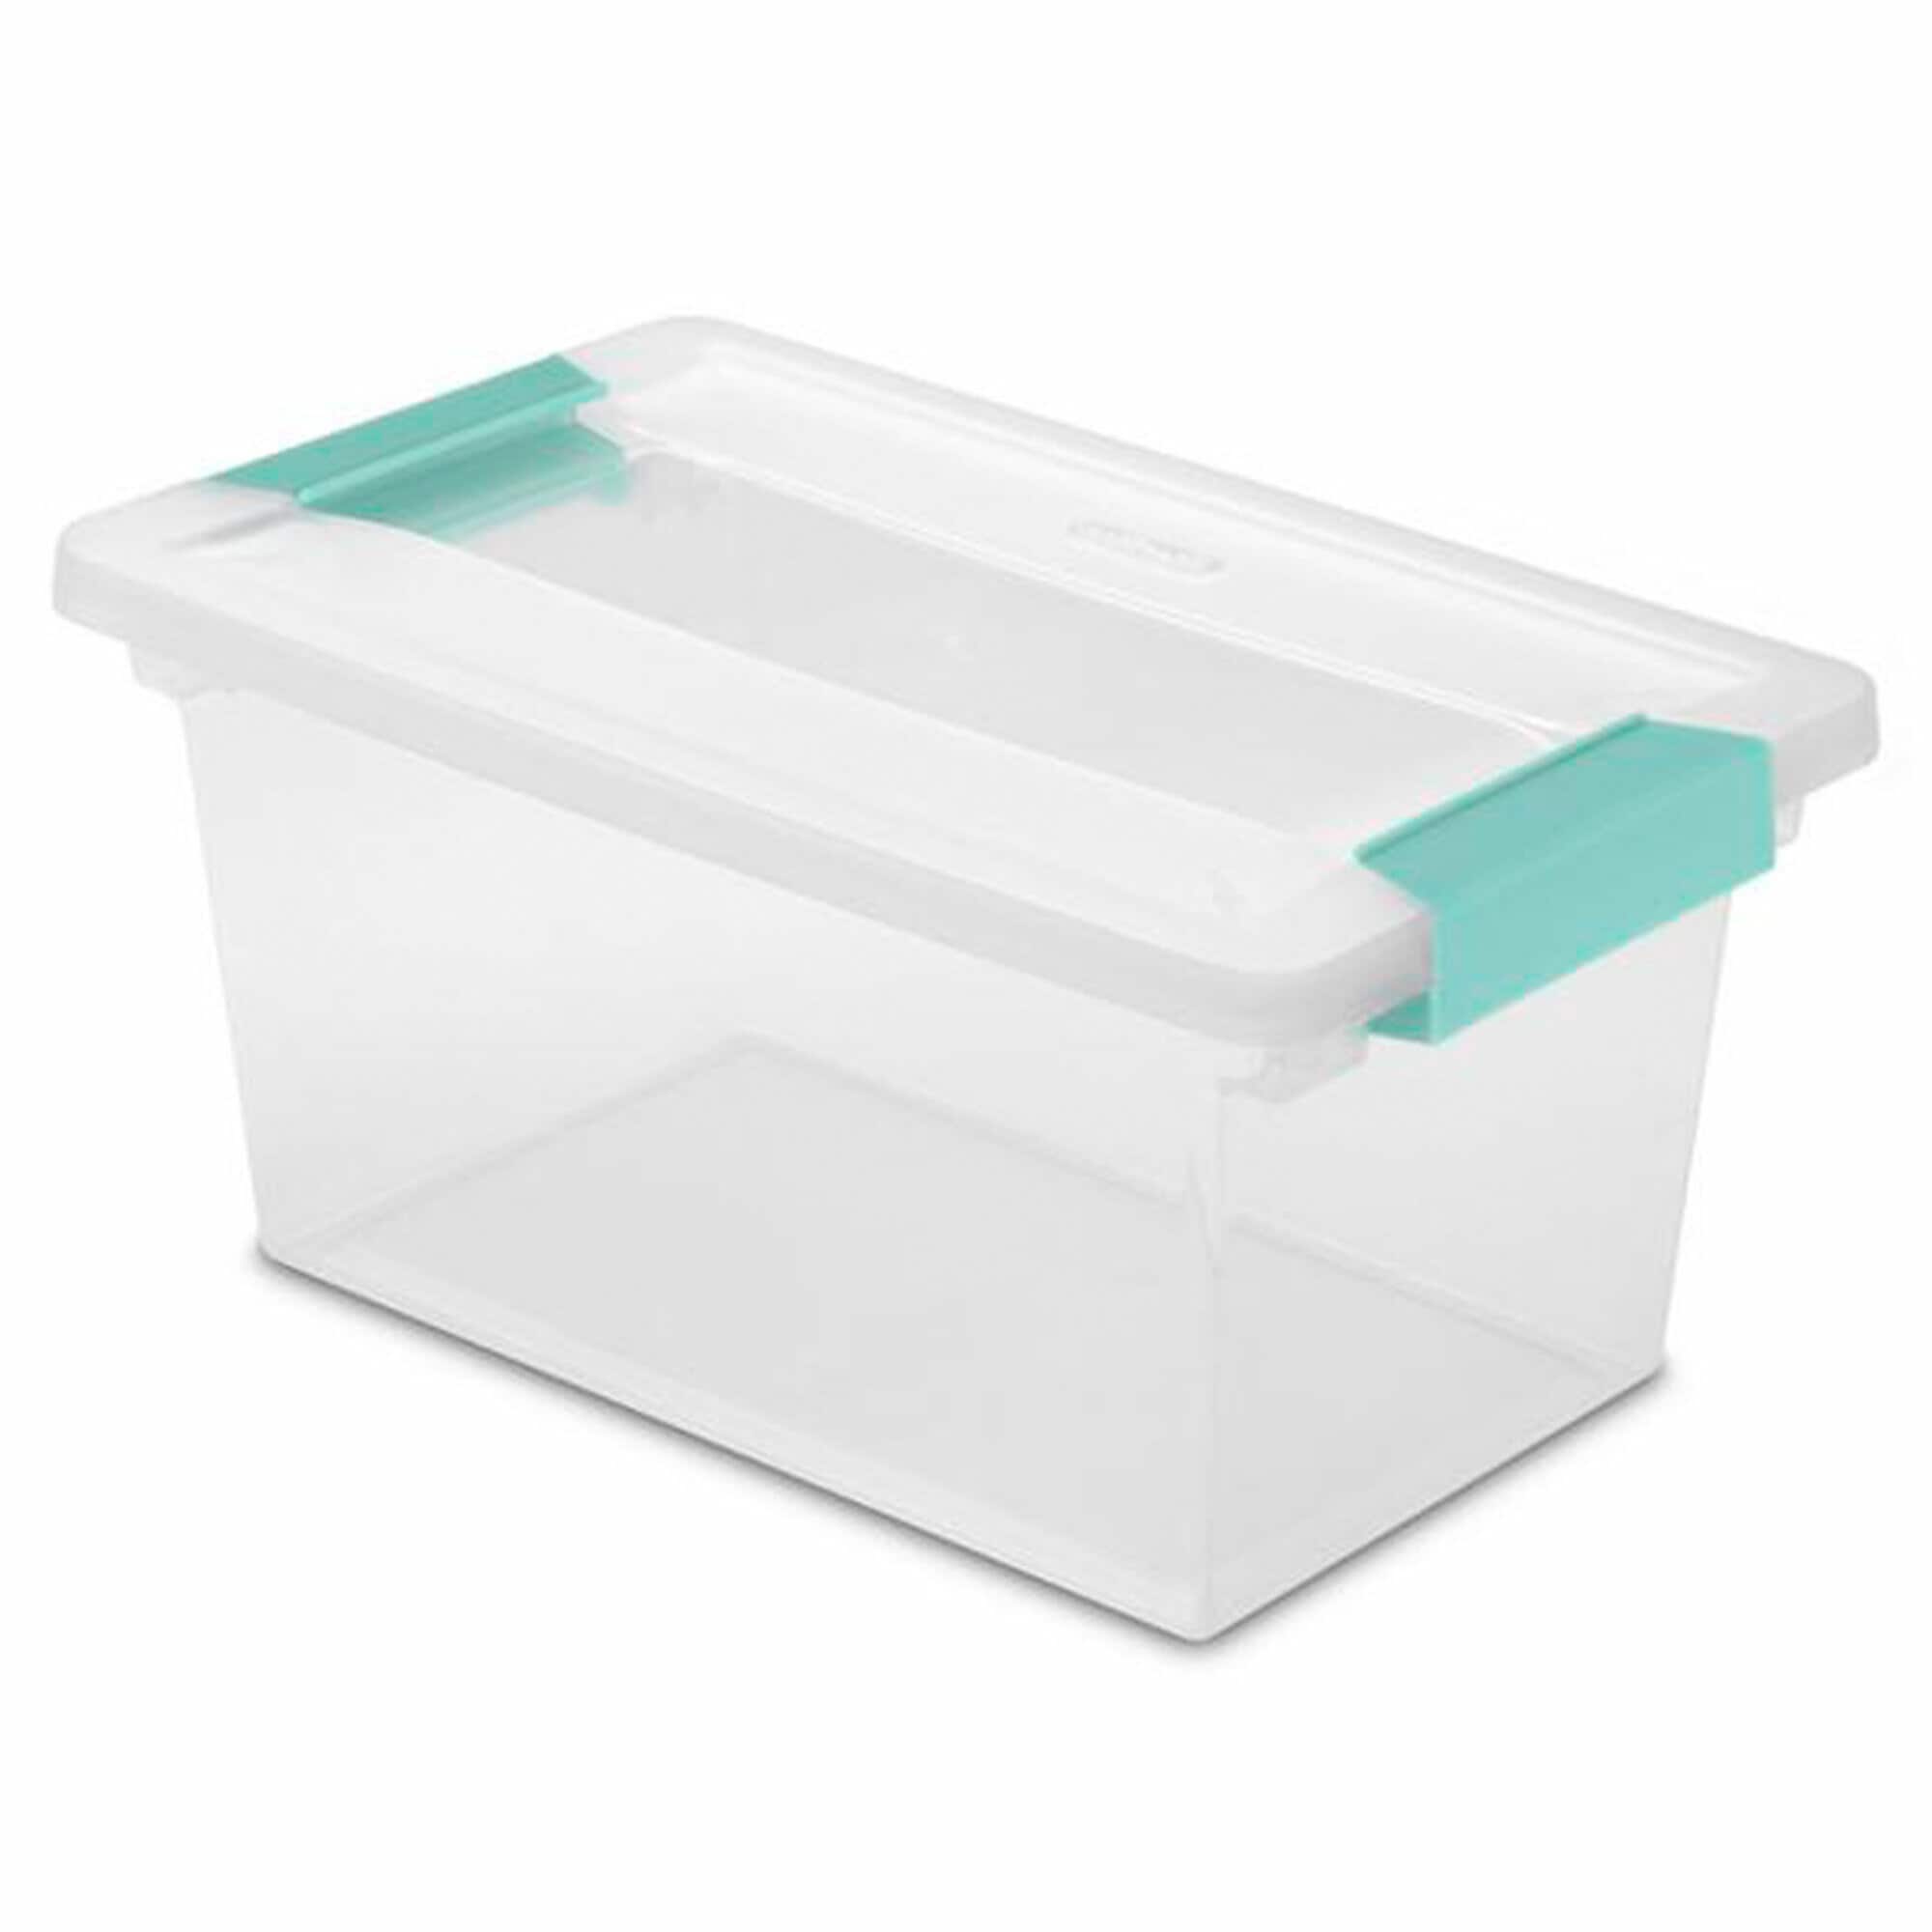 Sterilite 64 Qt Latching Box Large Stackable Clear Plastic Storage Totes, 6  Pack & Deep Clip Container Bins for Organization and Storage, 4 Pack